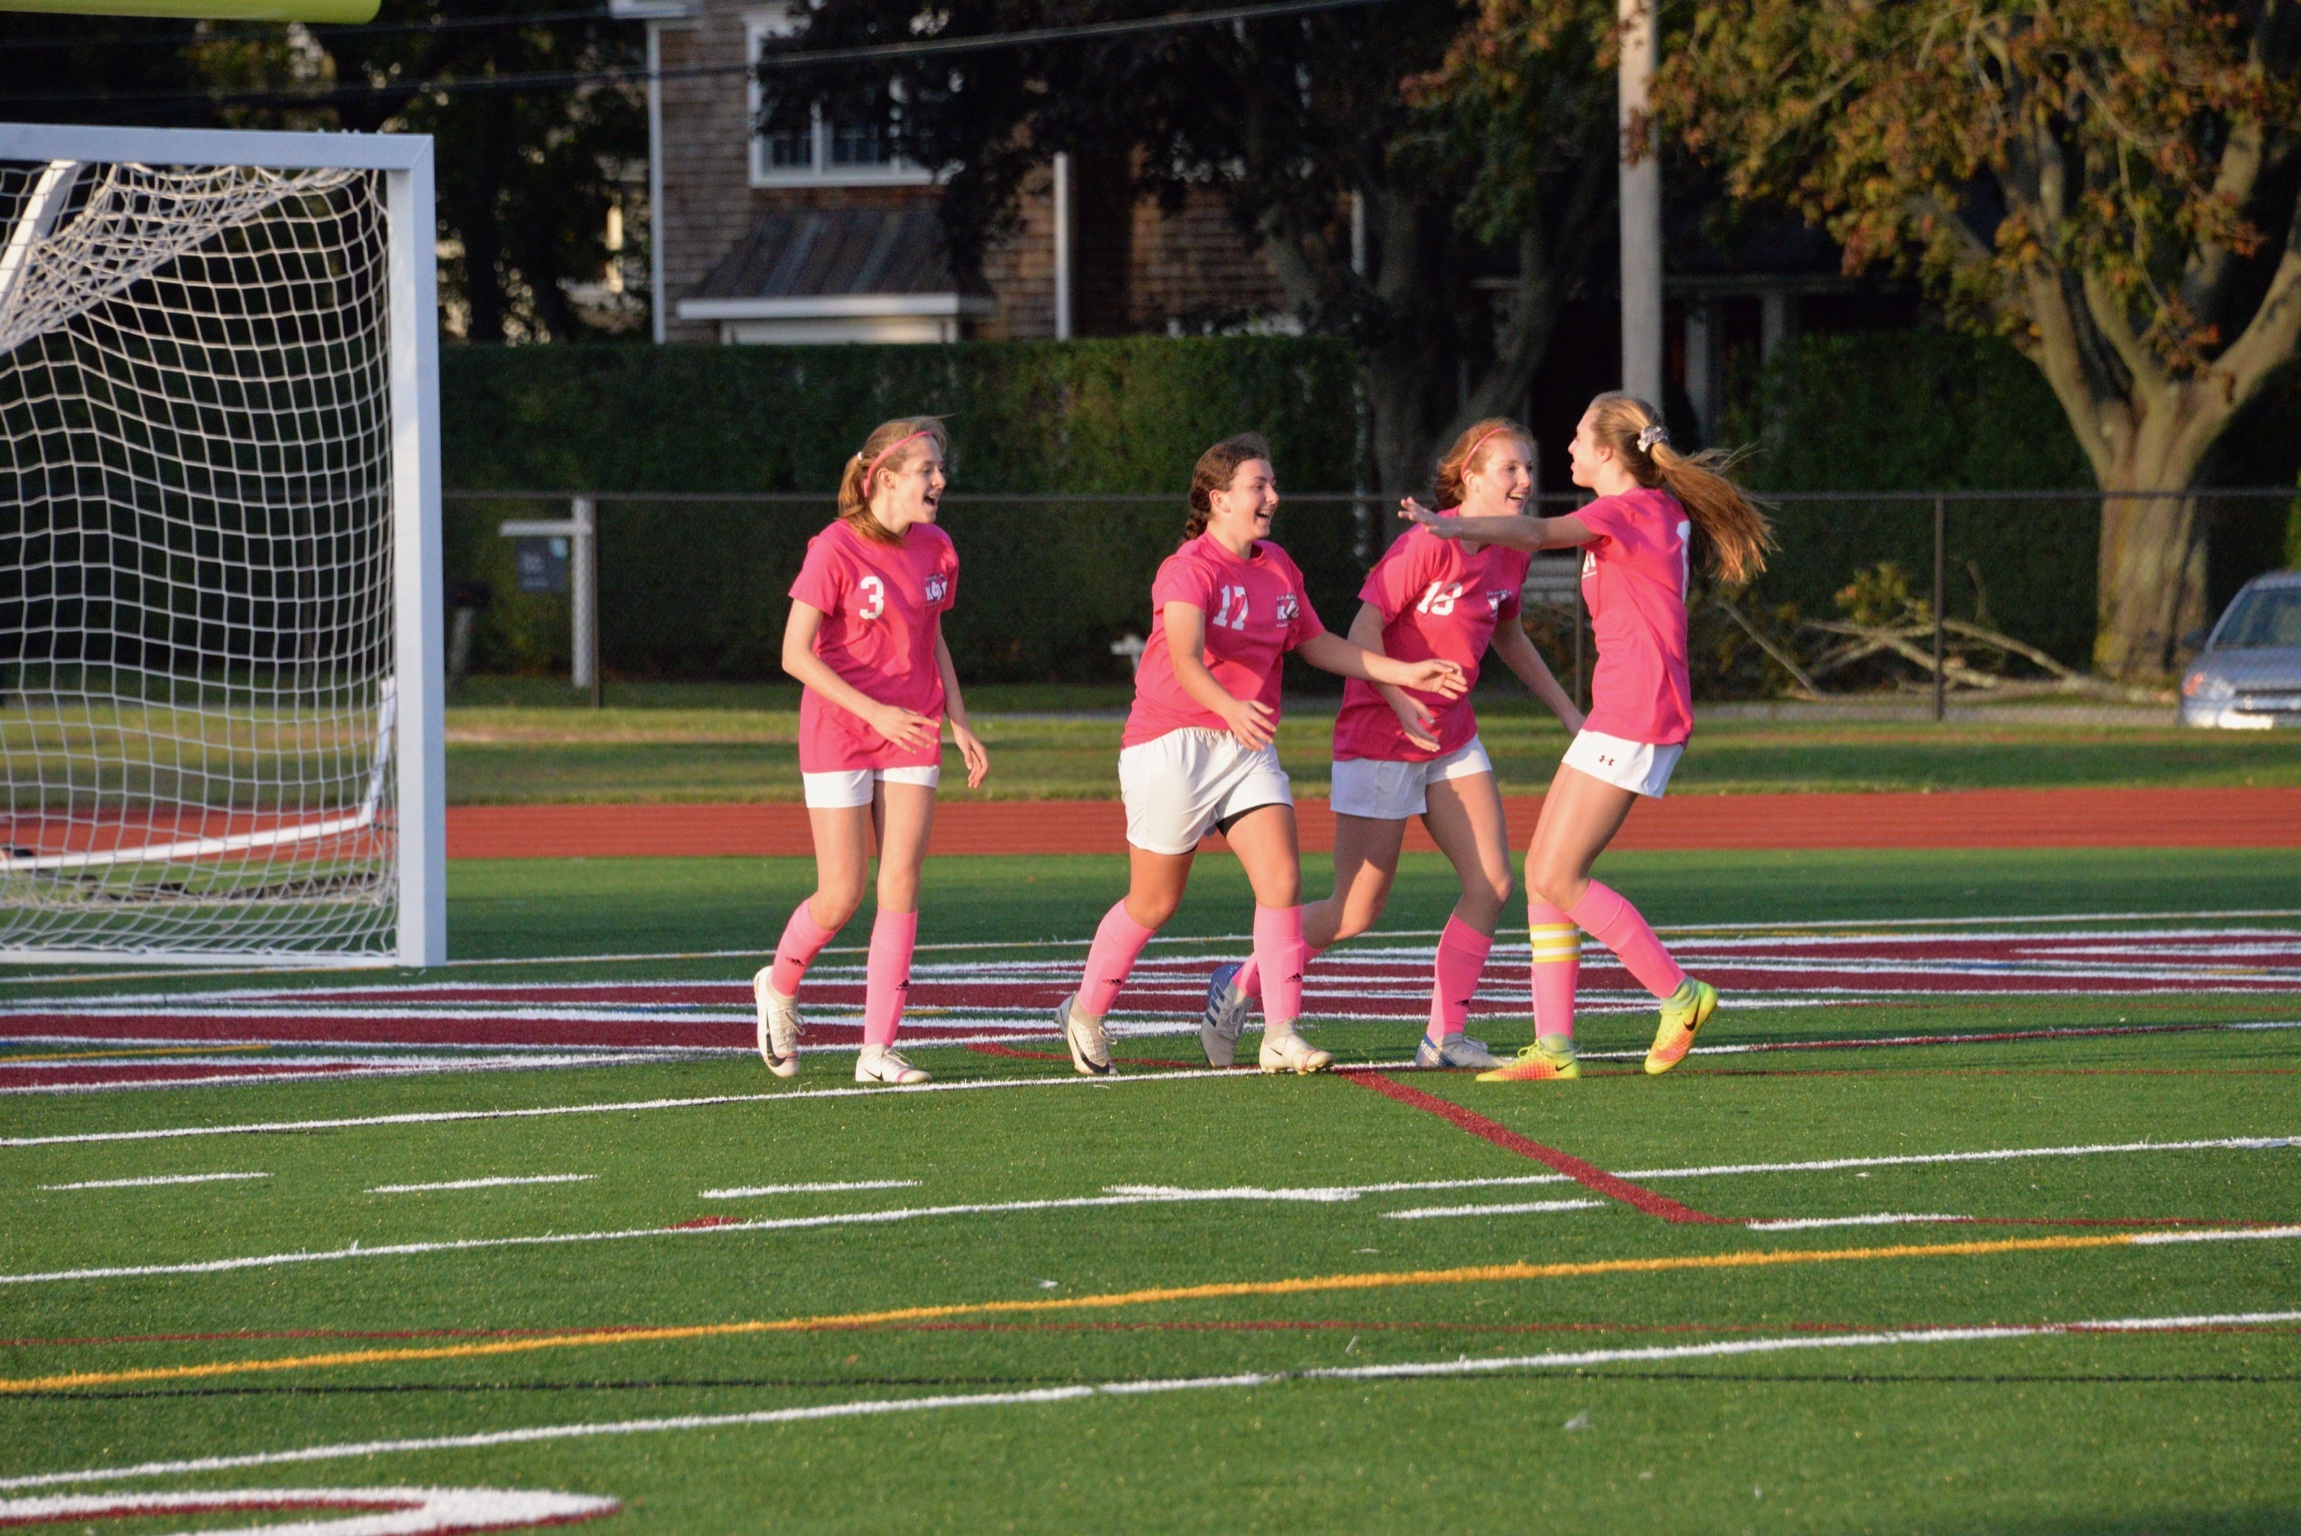 The Lady Mariners celebrate one of their three goals against Port Jeff last week.